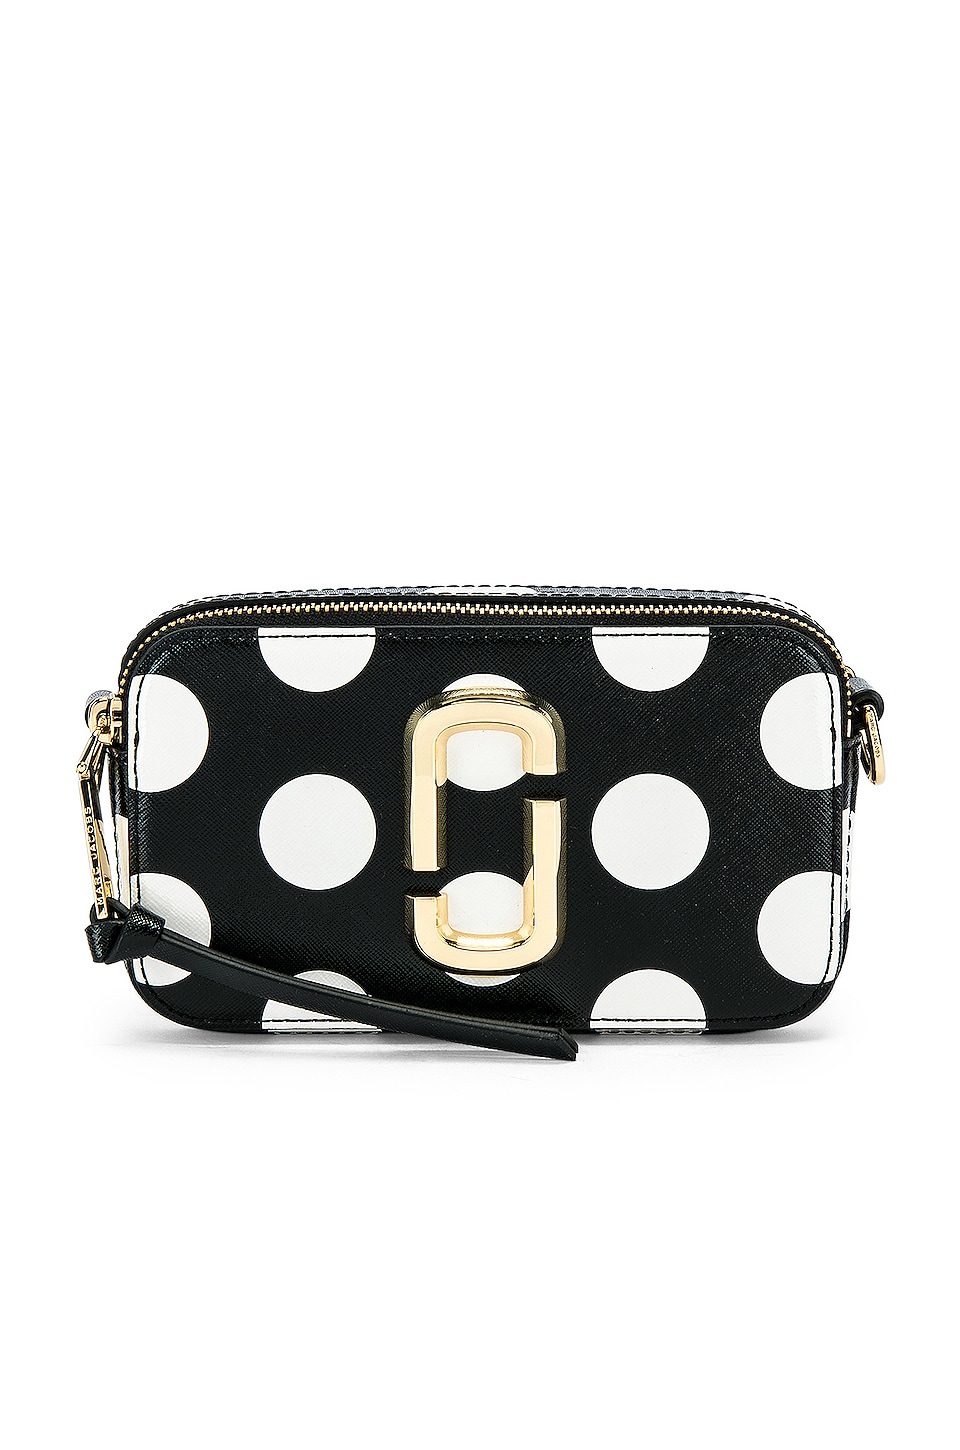 MARC JACOBS MARC JACOBS THE DOT SNAPSHOT IN BLACK.,MARJ-WY433